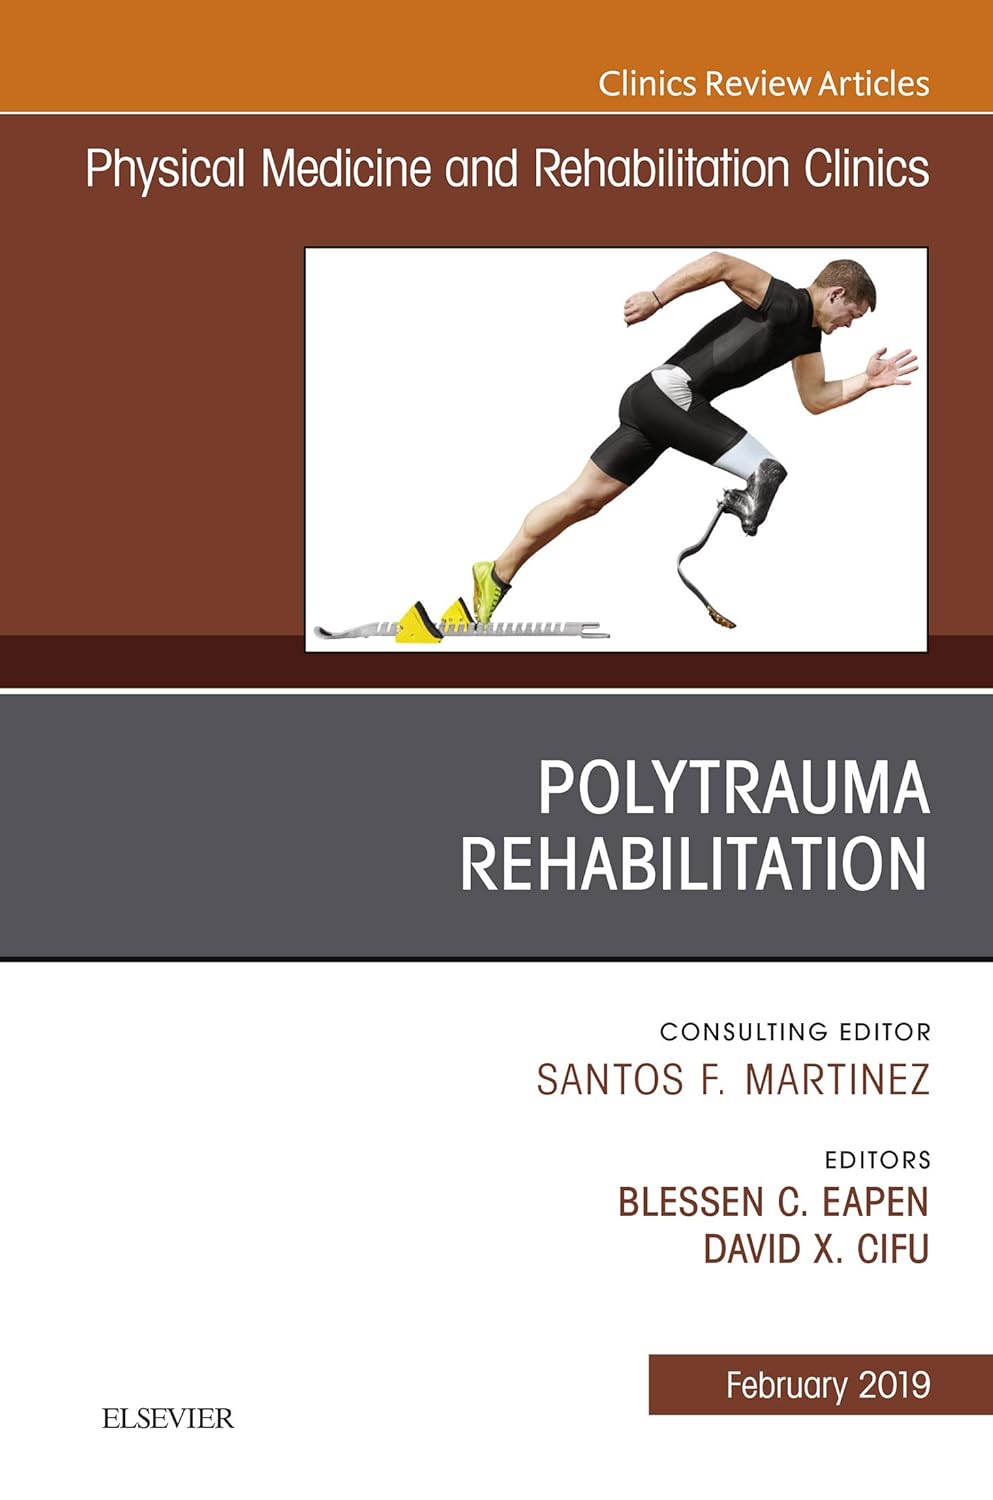 Polytrauma Rehabilitation, An Issue of Physical Medicine and Rehabilitation Clinics of North America (Volume 30-1) (The Clinics: Radiology, Volume 30-1)  by  Blessen C. Eapen 